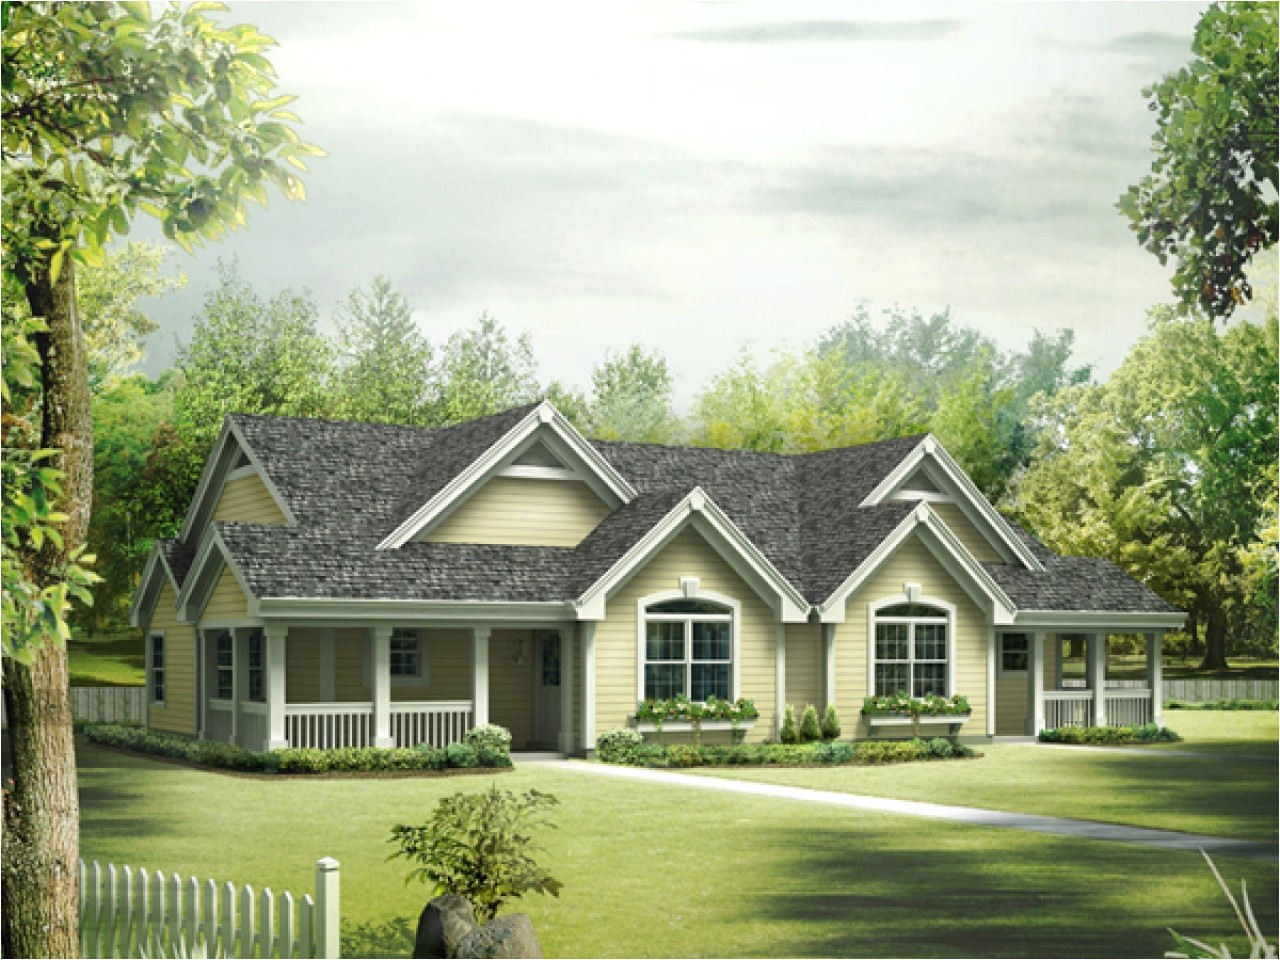 fafcf40210f4baaa ranch style house plans with wrap around porch floor plans ranch style house